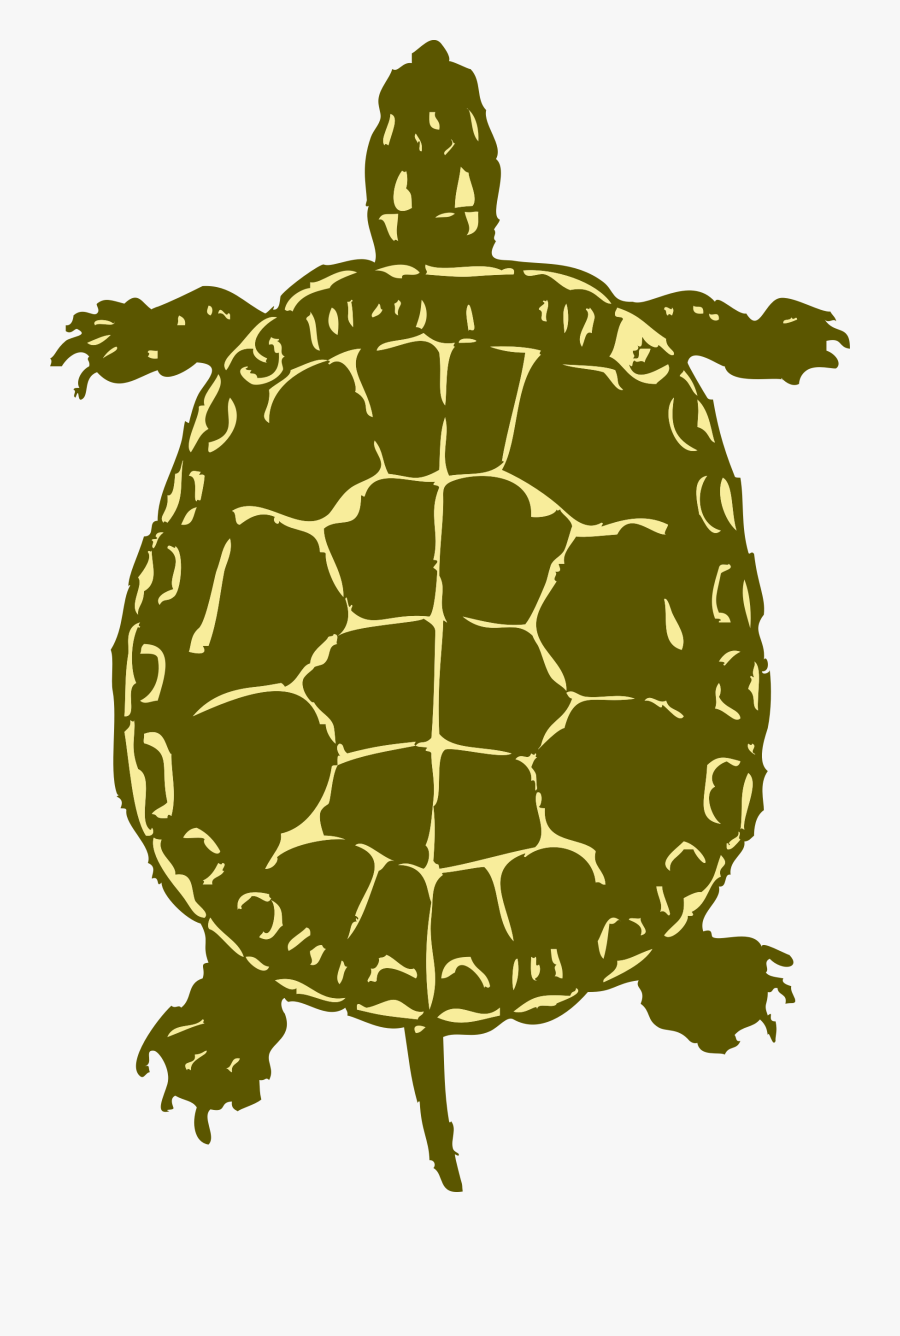 Sea Turtle Clipart Snapping Turtle - Birds Eye View Of A Turtle, Transparent Clipart